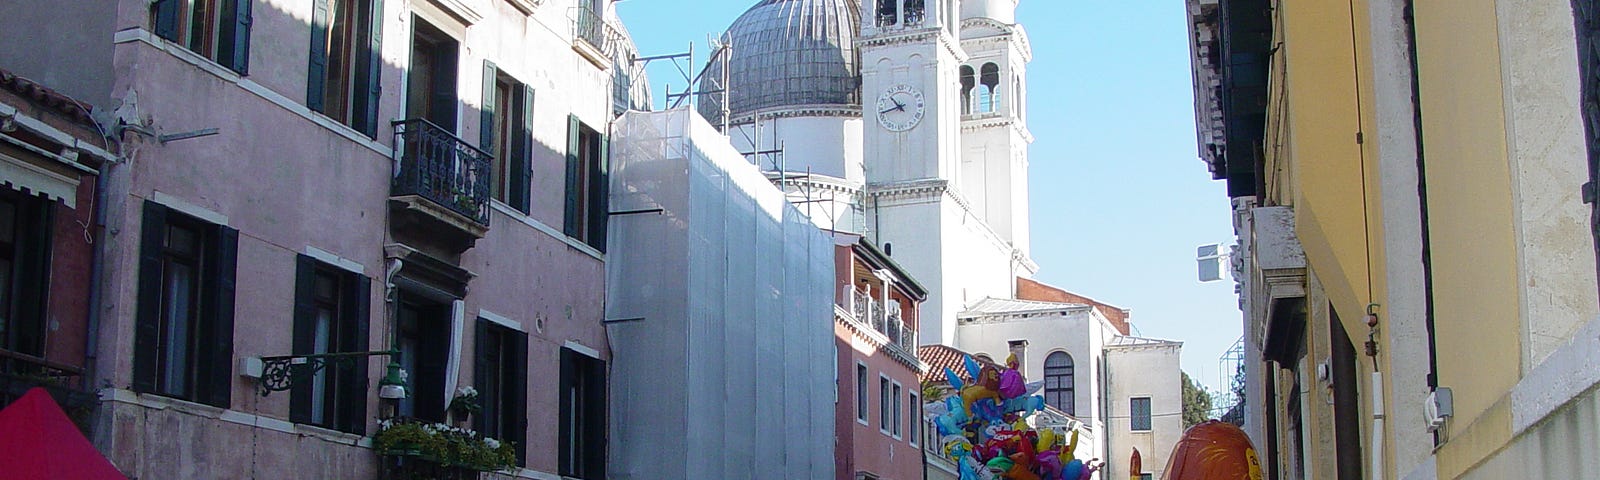 A narrow corridor behind the Basilica Santa Maria della Salute in Venice is crowded elbow to elbow with tourists.